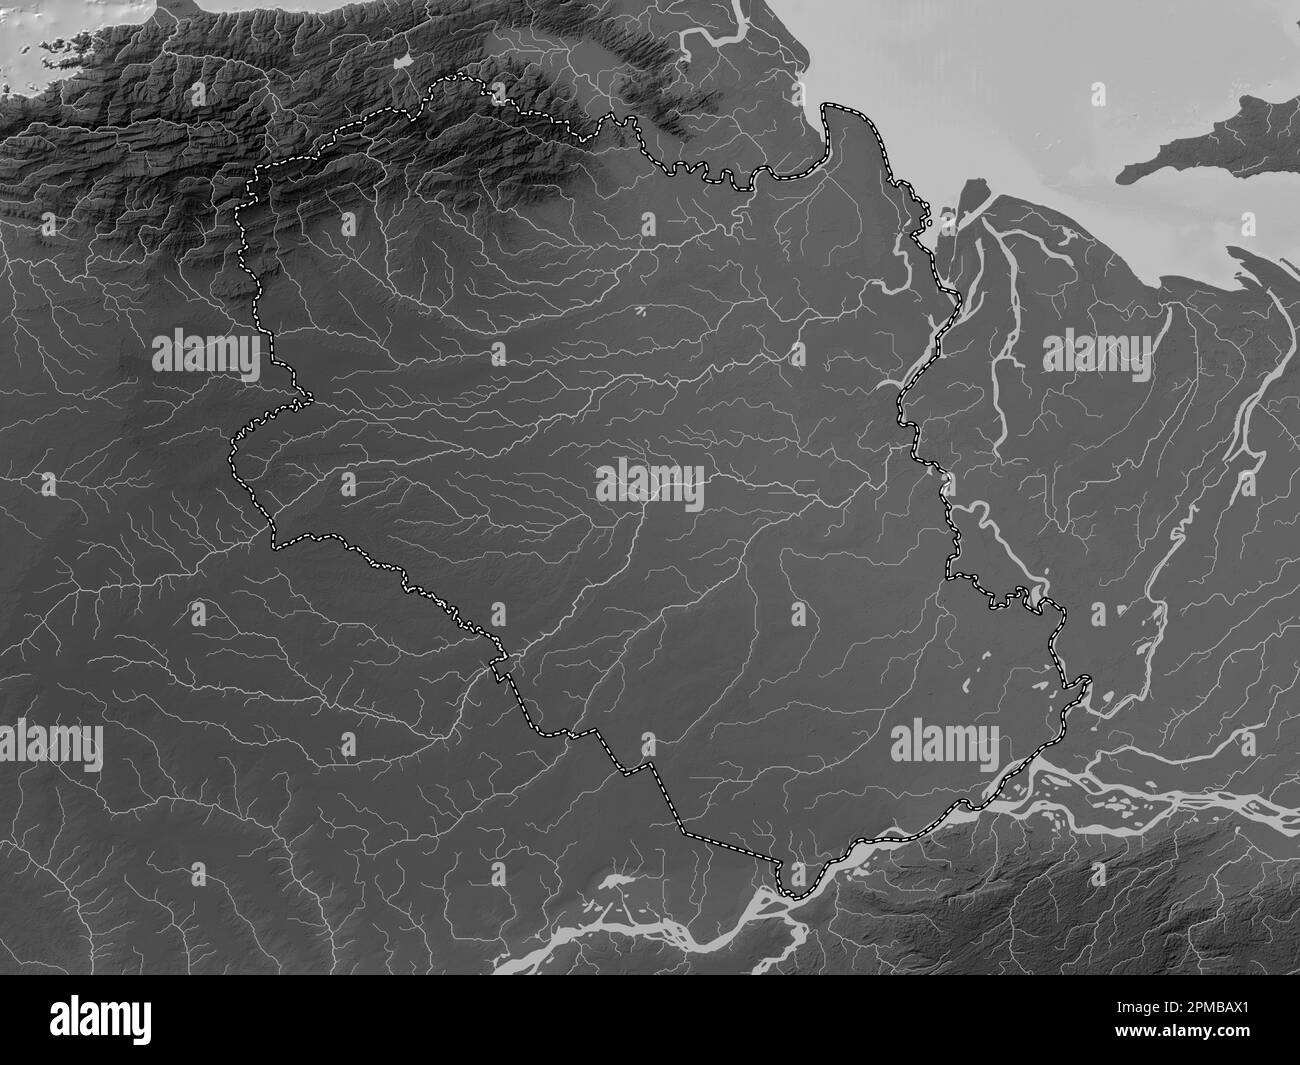 Monagas, state of Venezuela. Grayscale elevation map with lakes and rivers Stock Photo